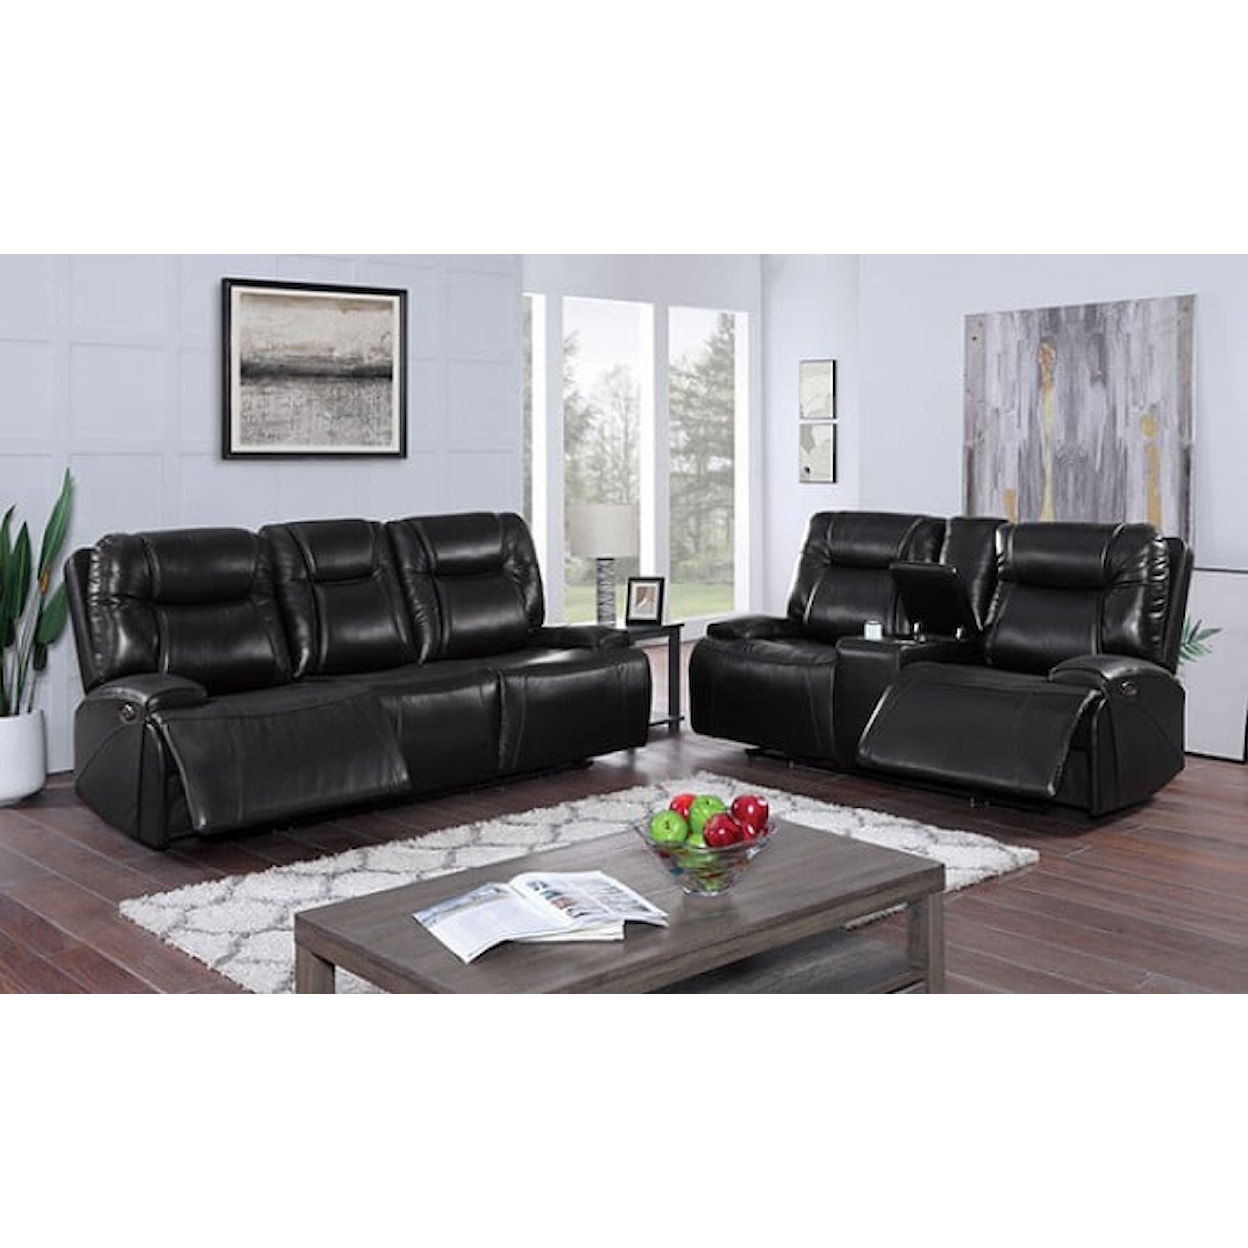 Furniture of America BASQUE Power Reclining Black Sofa and Loveseat